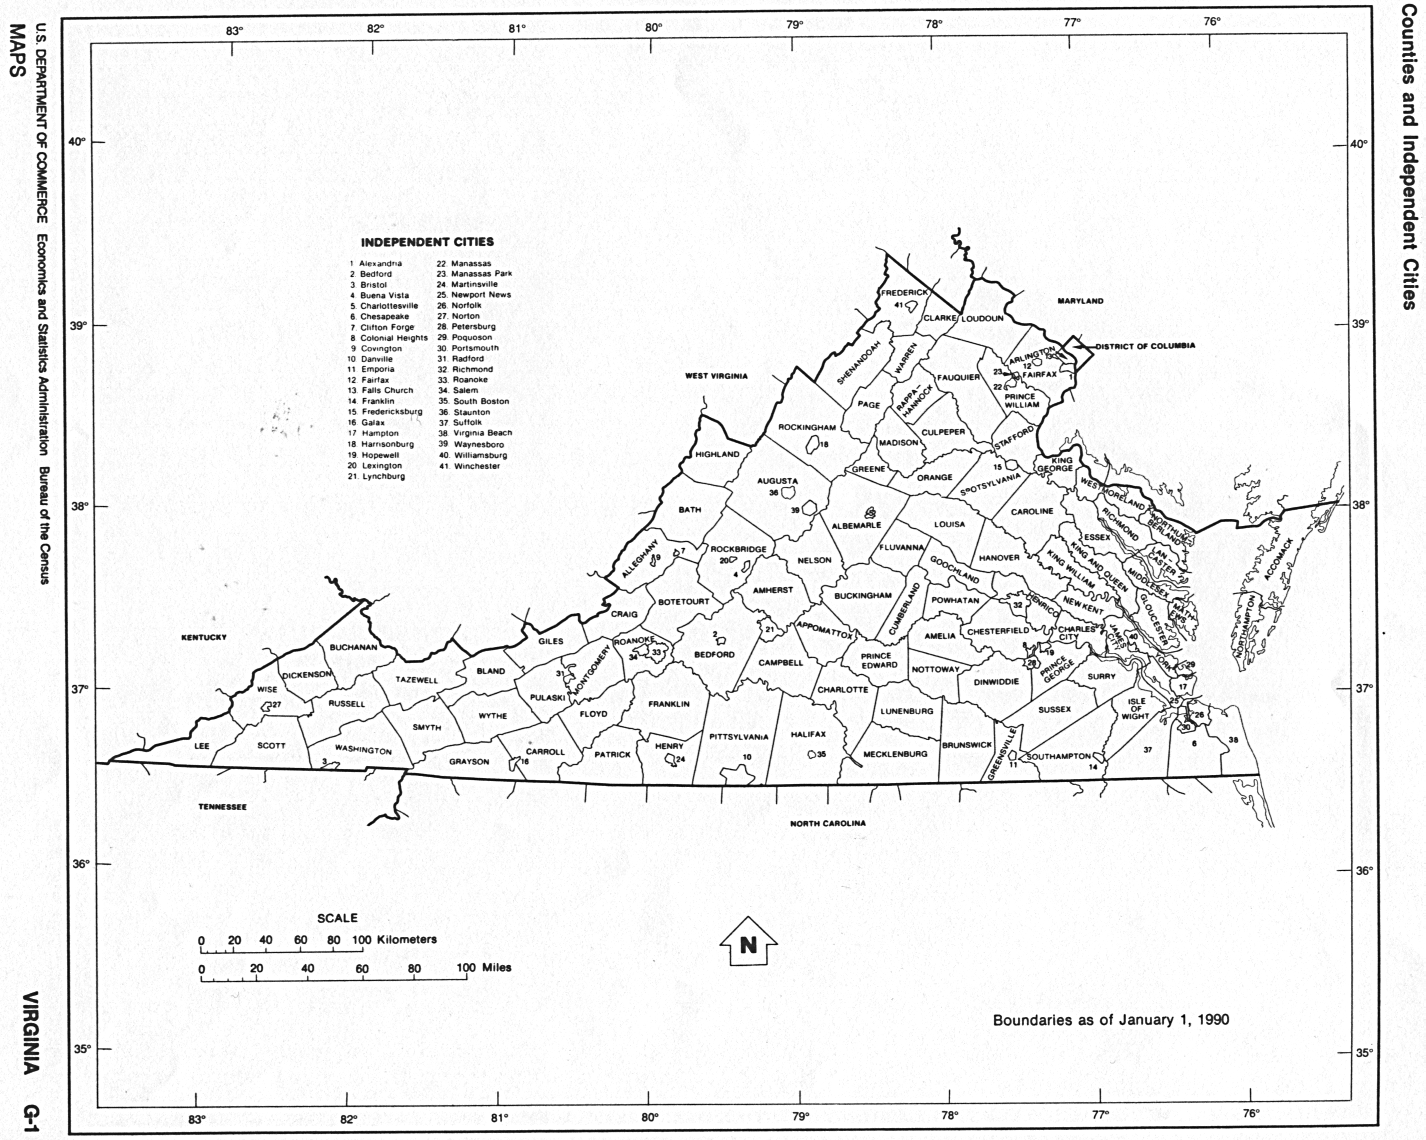 Virginia Maps Perry Castaneda Map Collection Ut Library Online